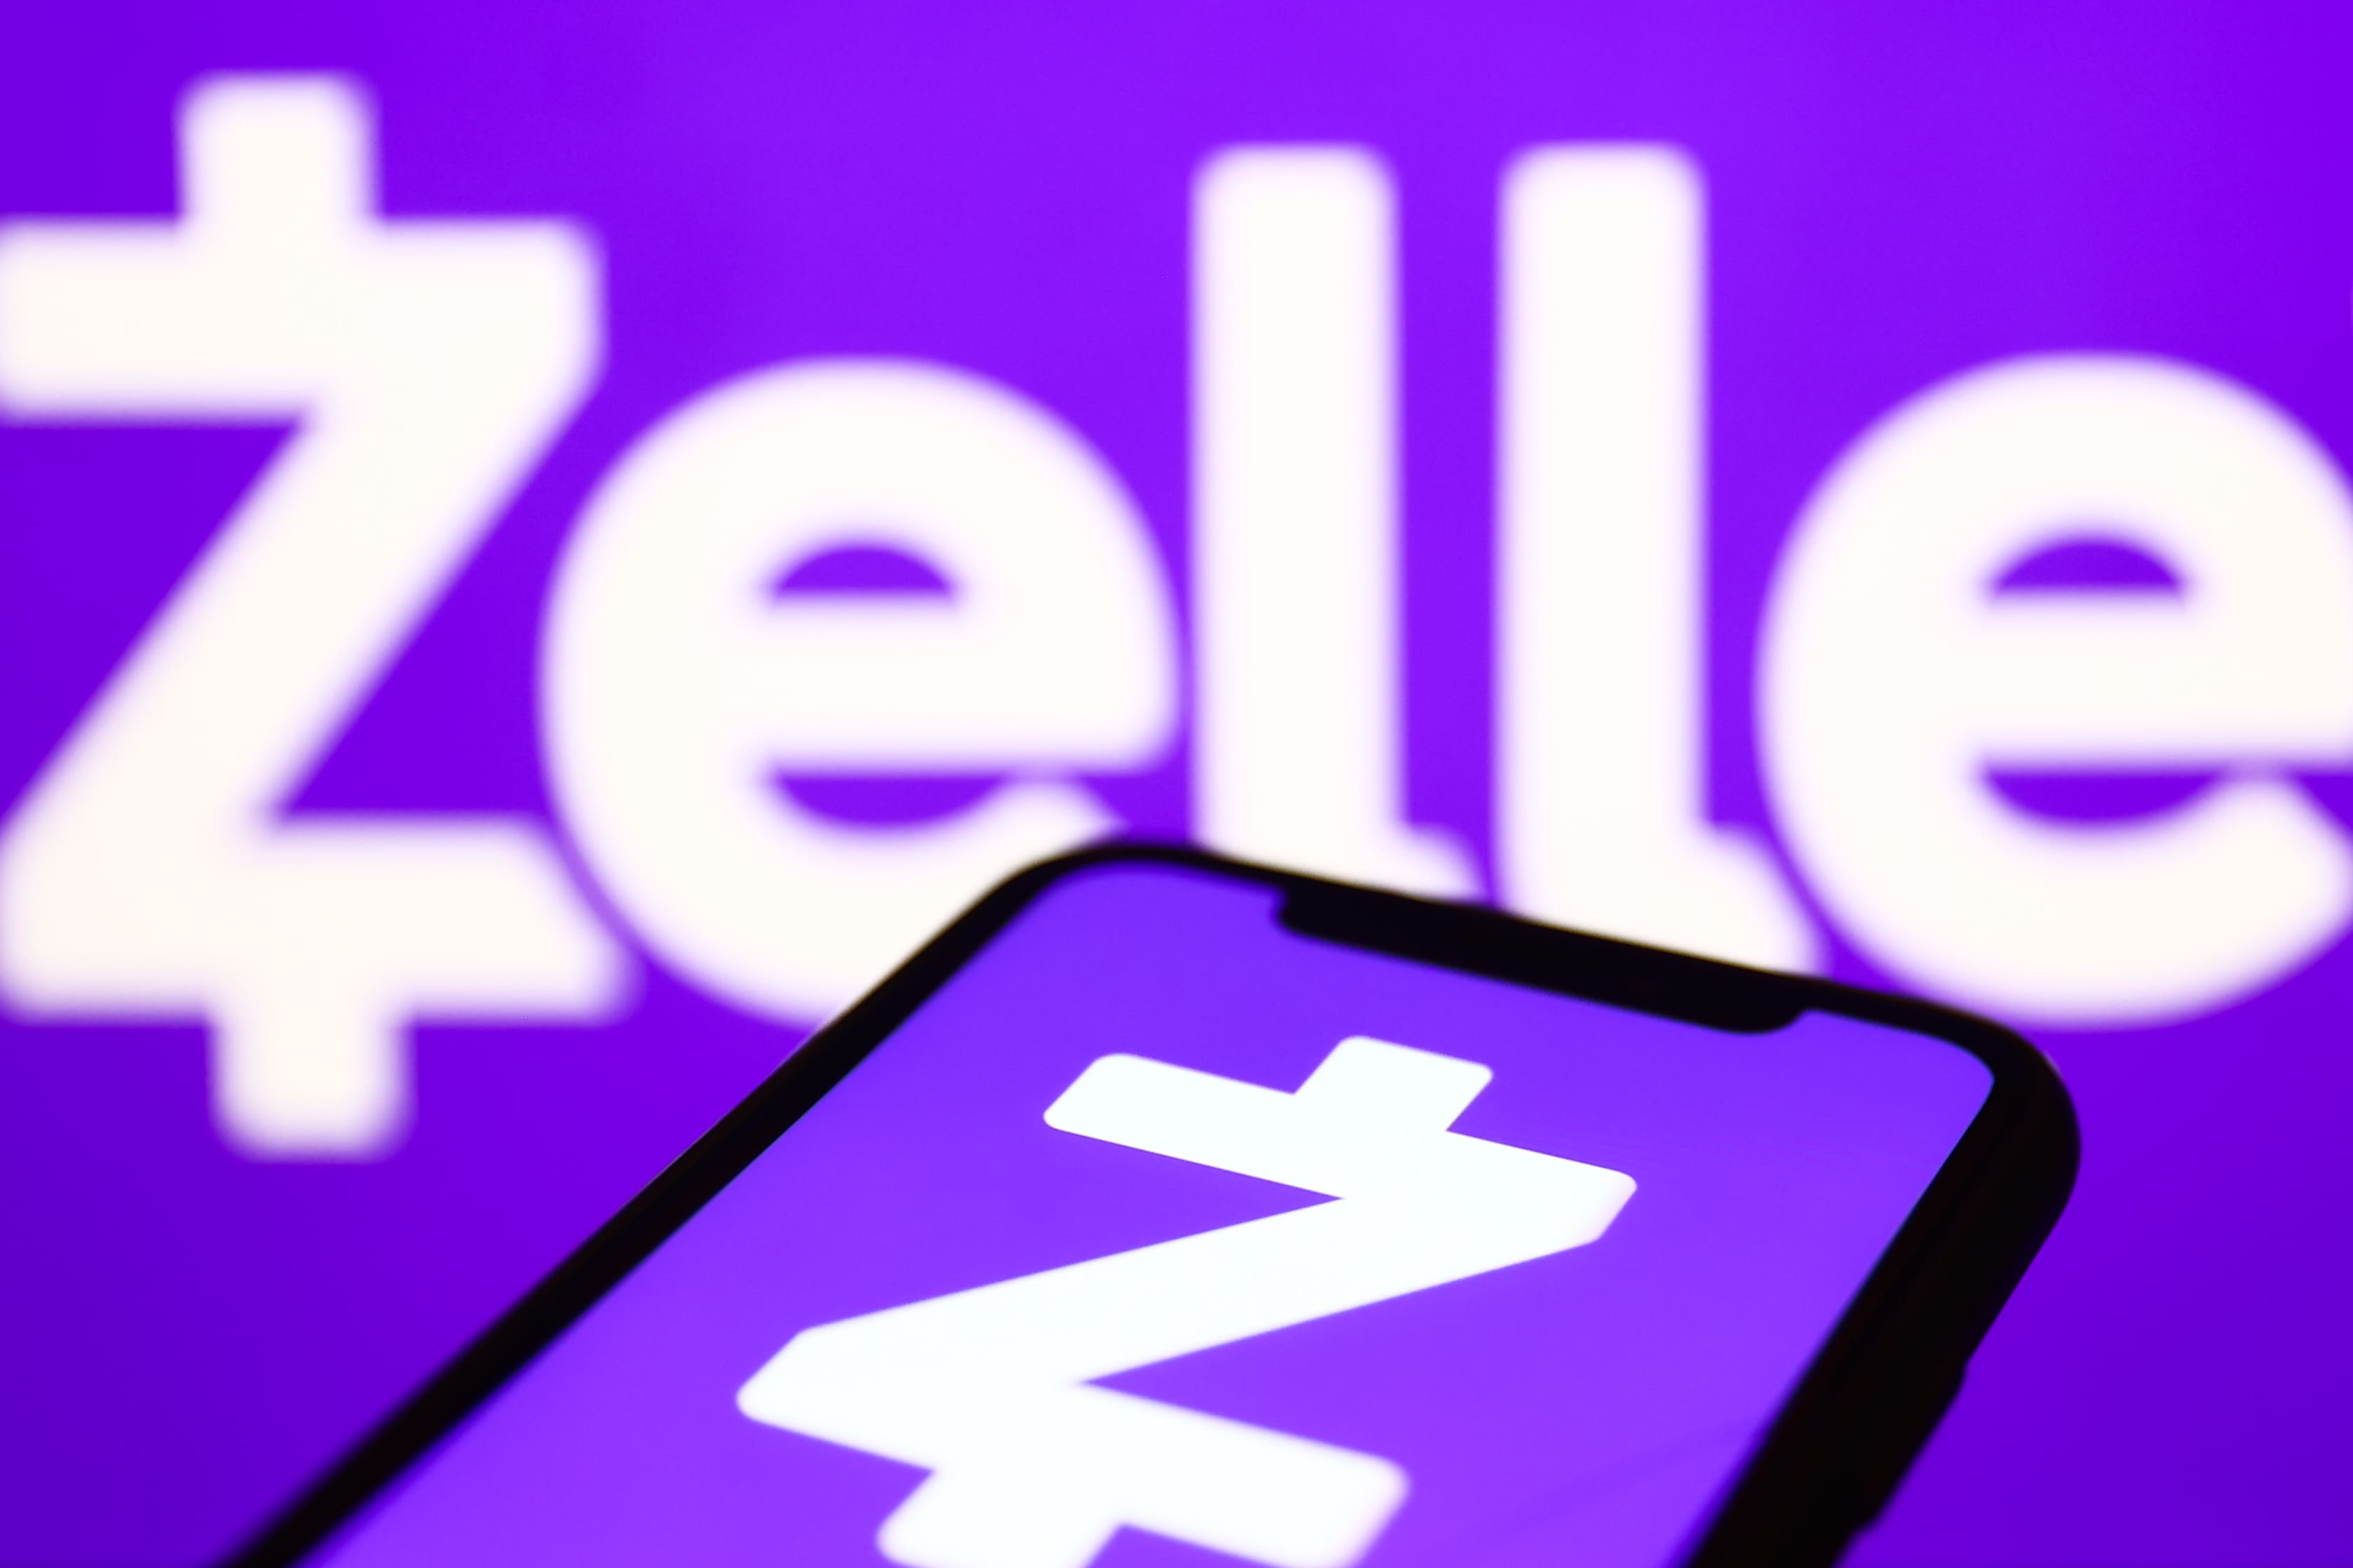 PayPal vs. Venmo vs. Zelle: Is There Actually a Difference, and Which One Is Best?